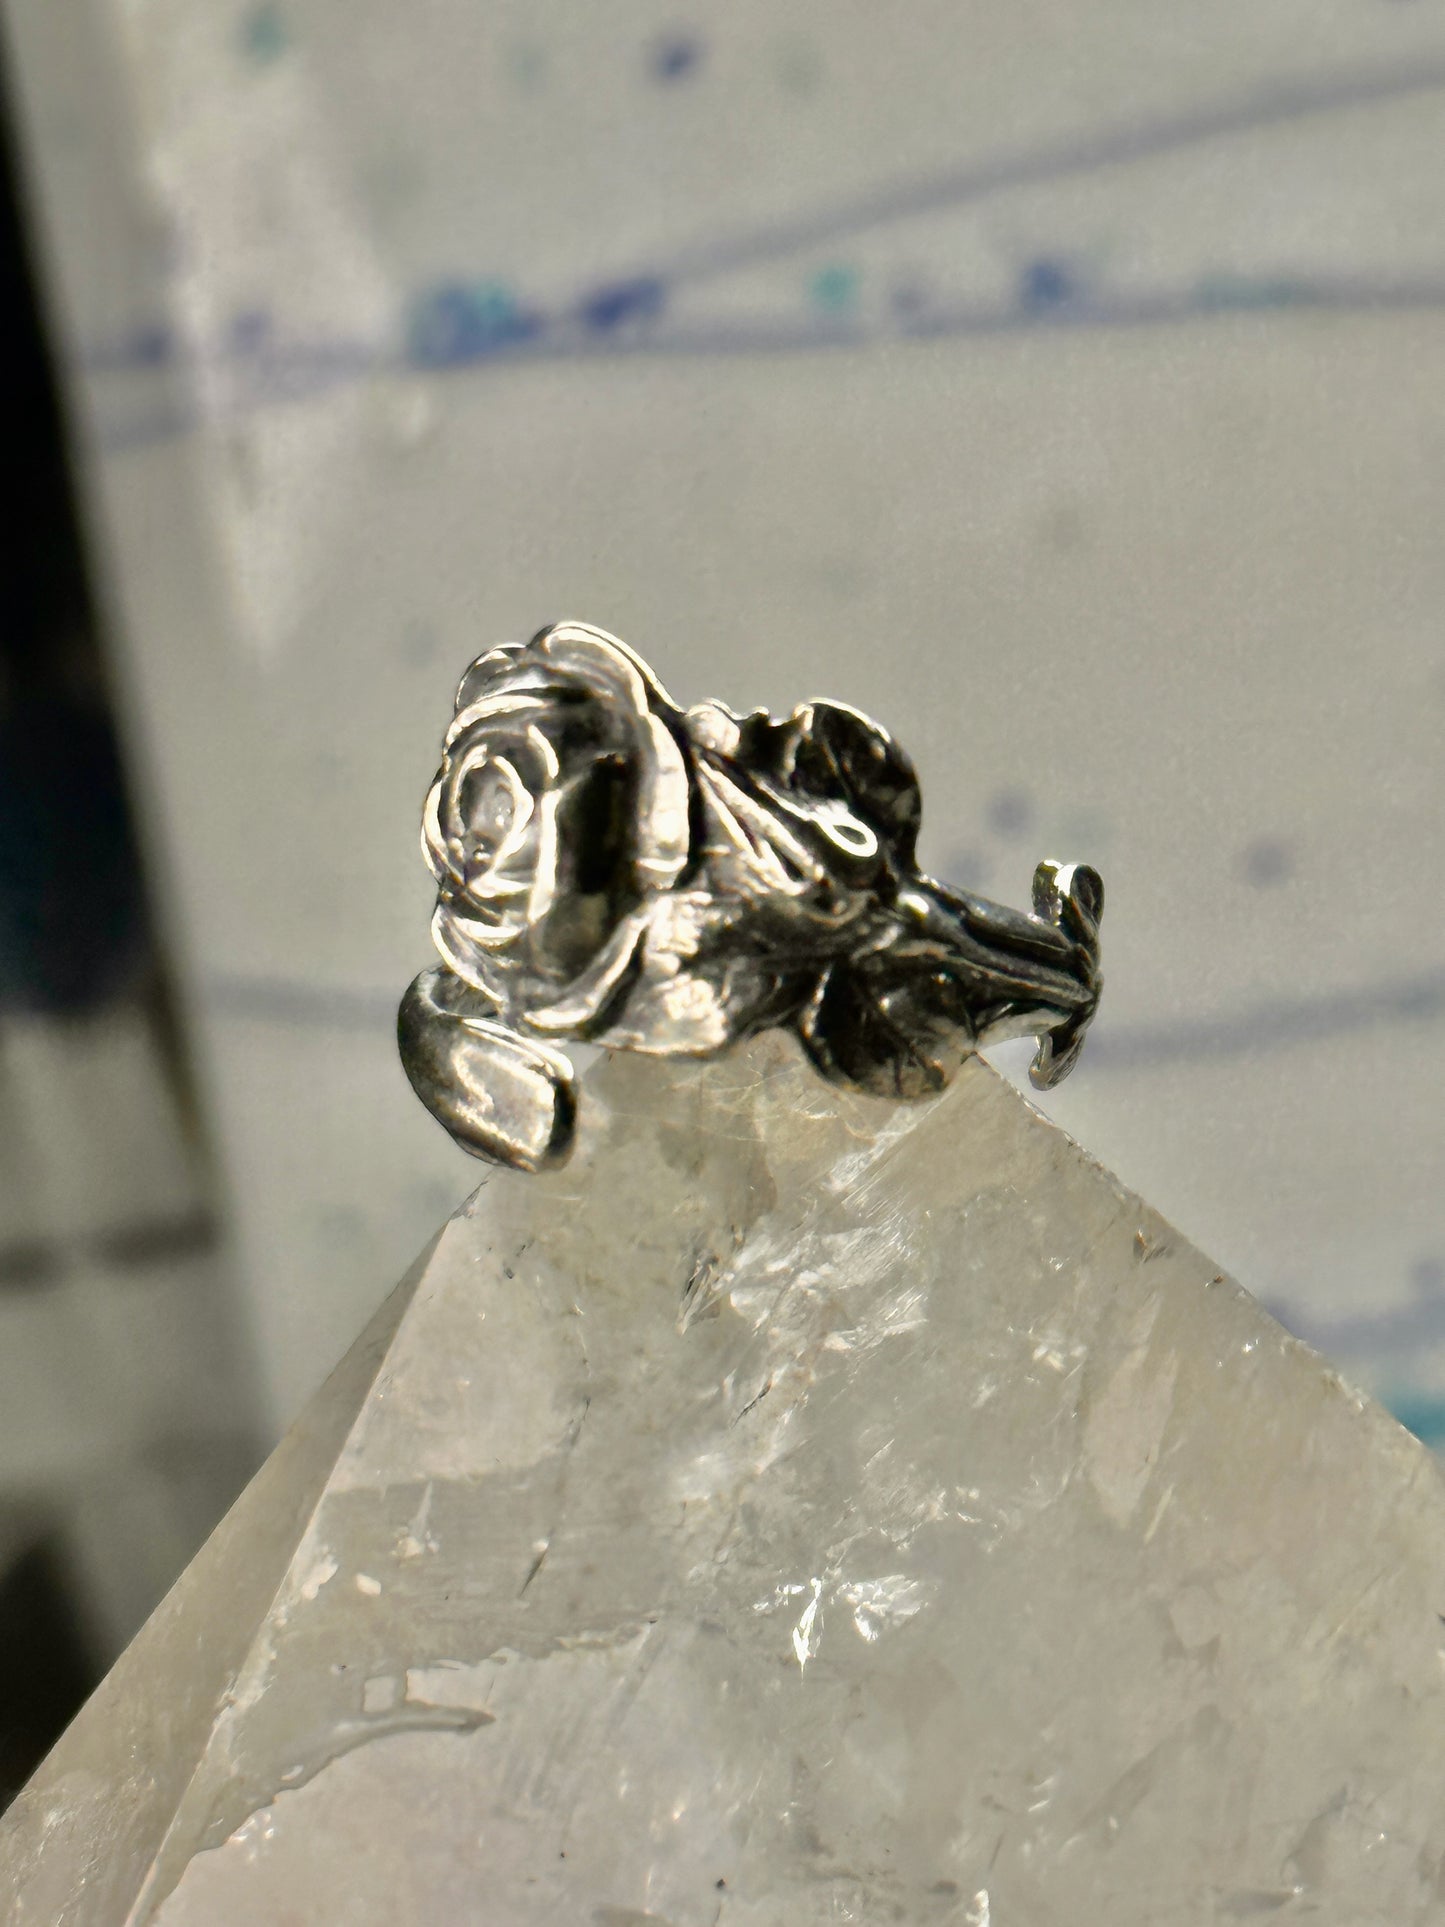 Rose  Spoon ring band size 7 leaves floral sterling silver girls women